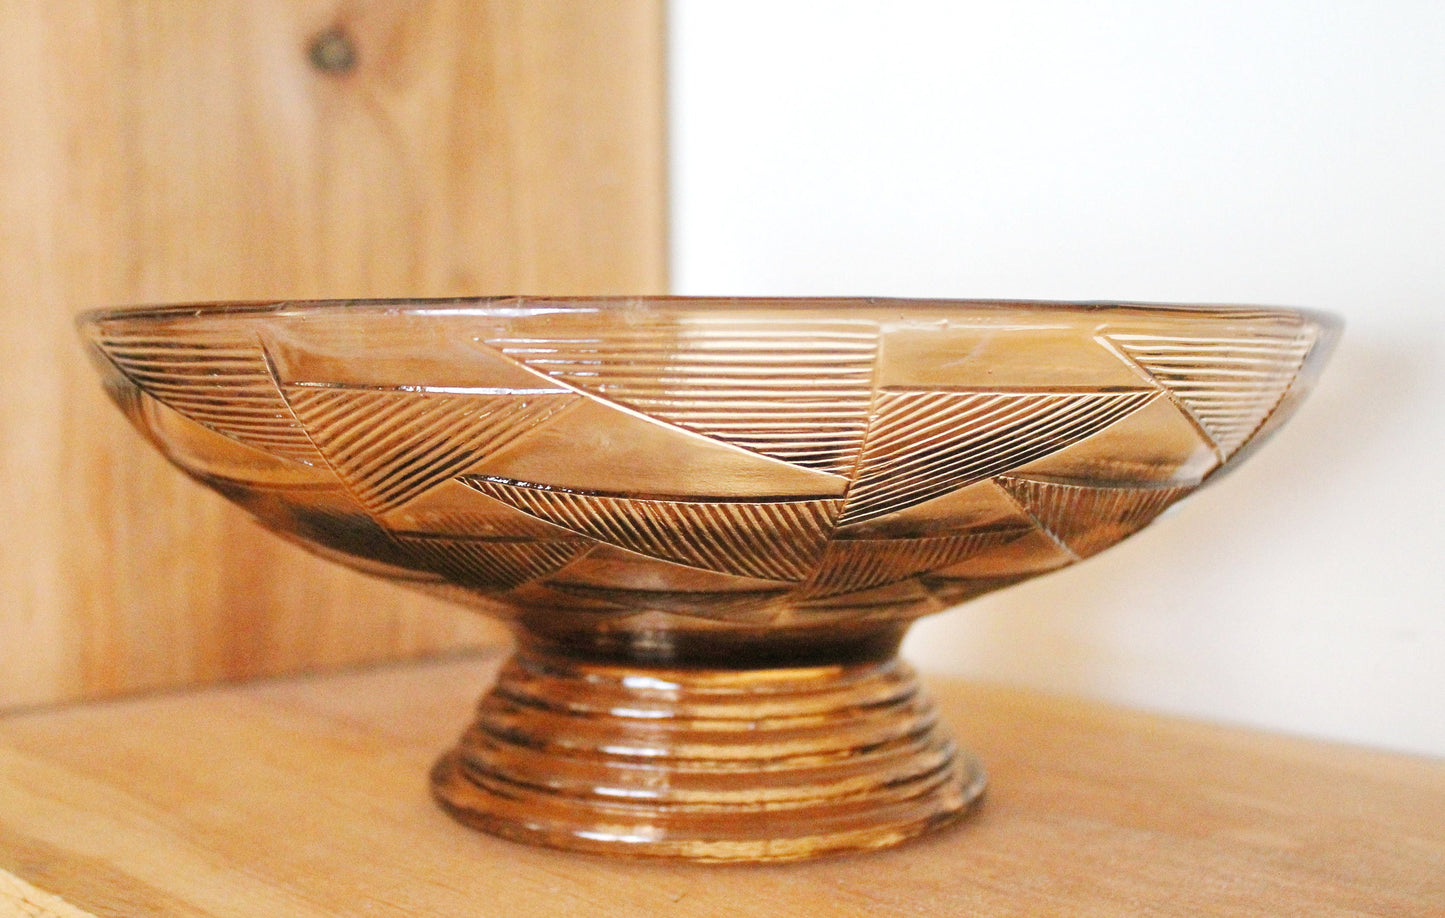 Vintage brown candy/fruit Glass bowl  - 9 inches - Vase for candies - Tableware USSR kitchen - 1960s